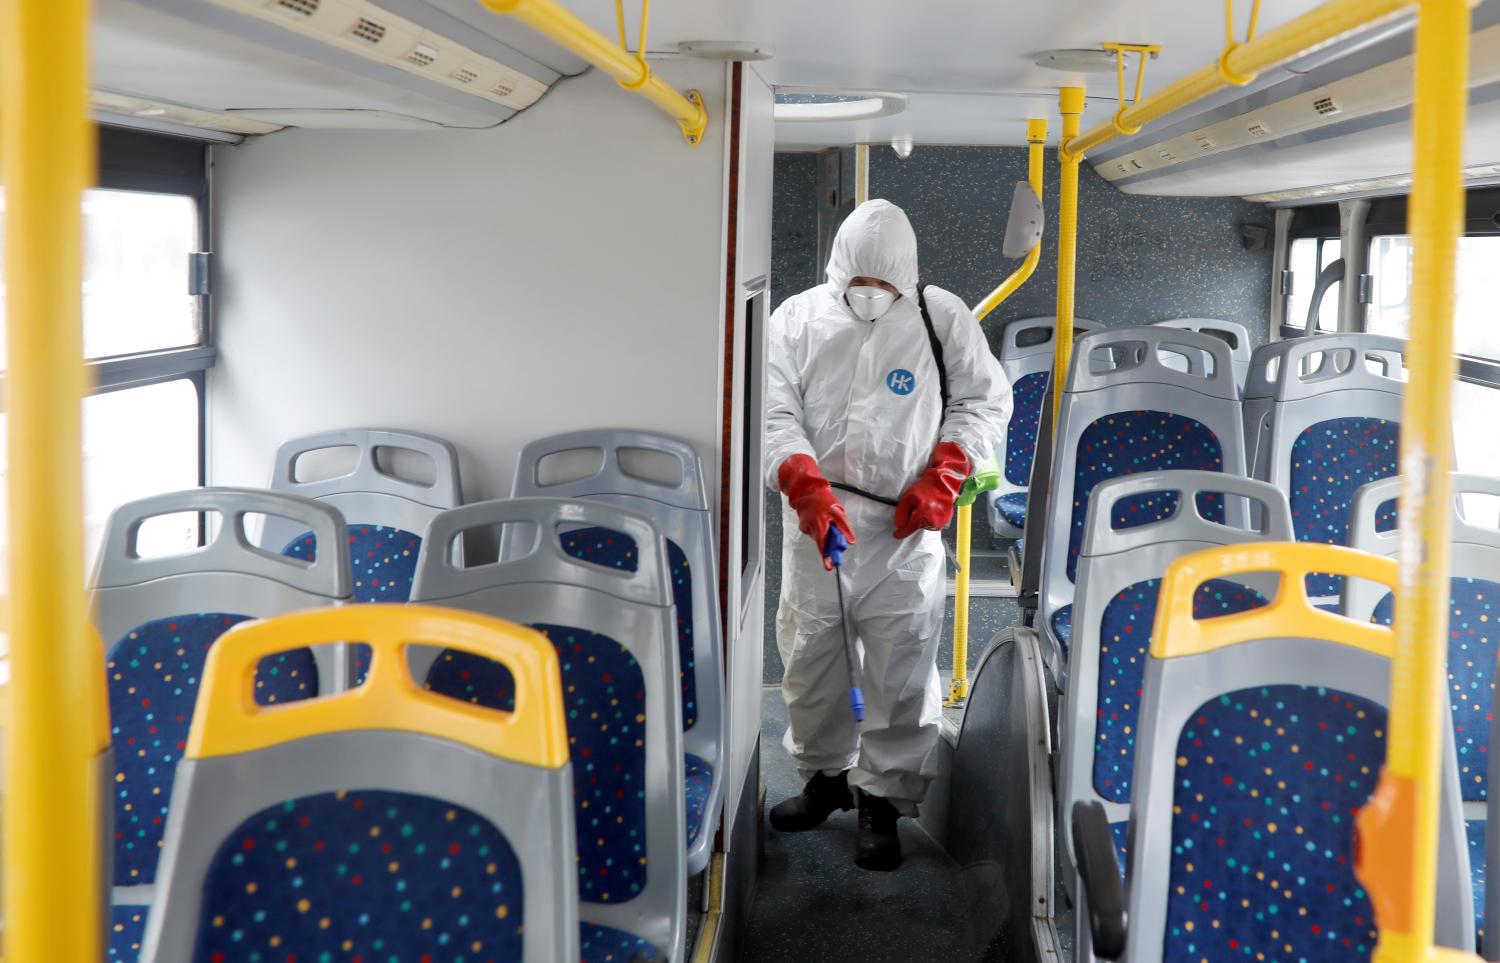 A staff member at city transport company wearing protective clothing disinfects a bus as new coronavirus disease (COVID-19) cases are reported in Skopje, North Macedonia March 7, 2020.REUTERS/Ognen Teofilovski